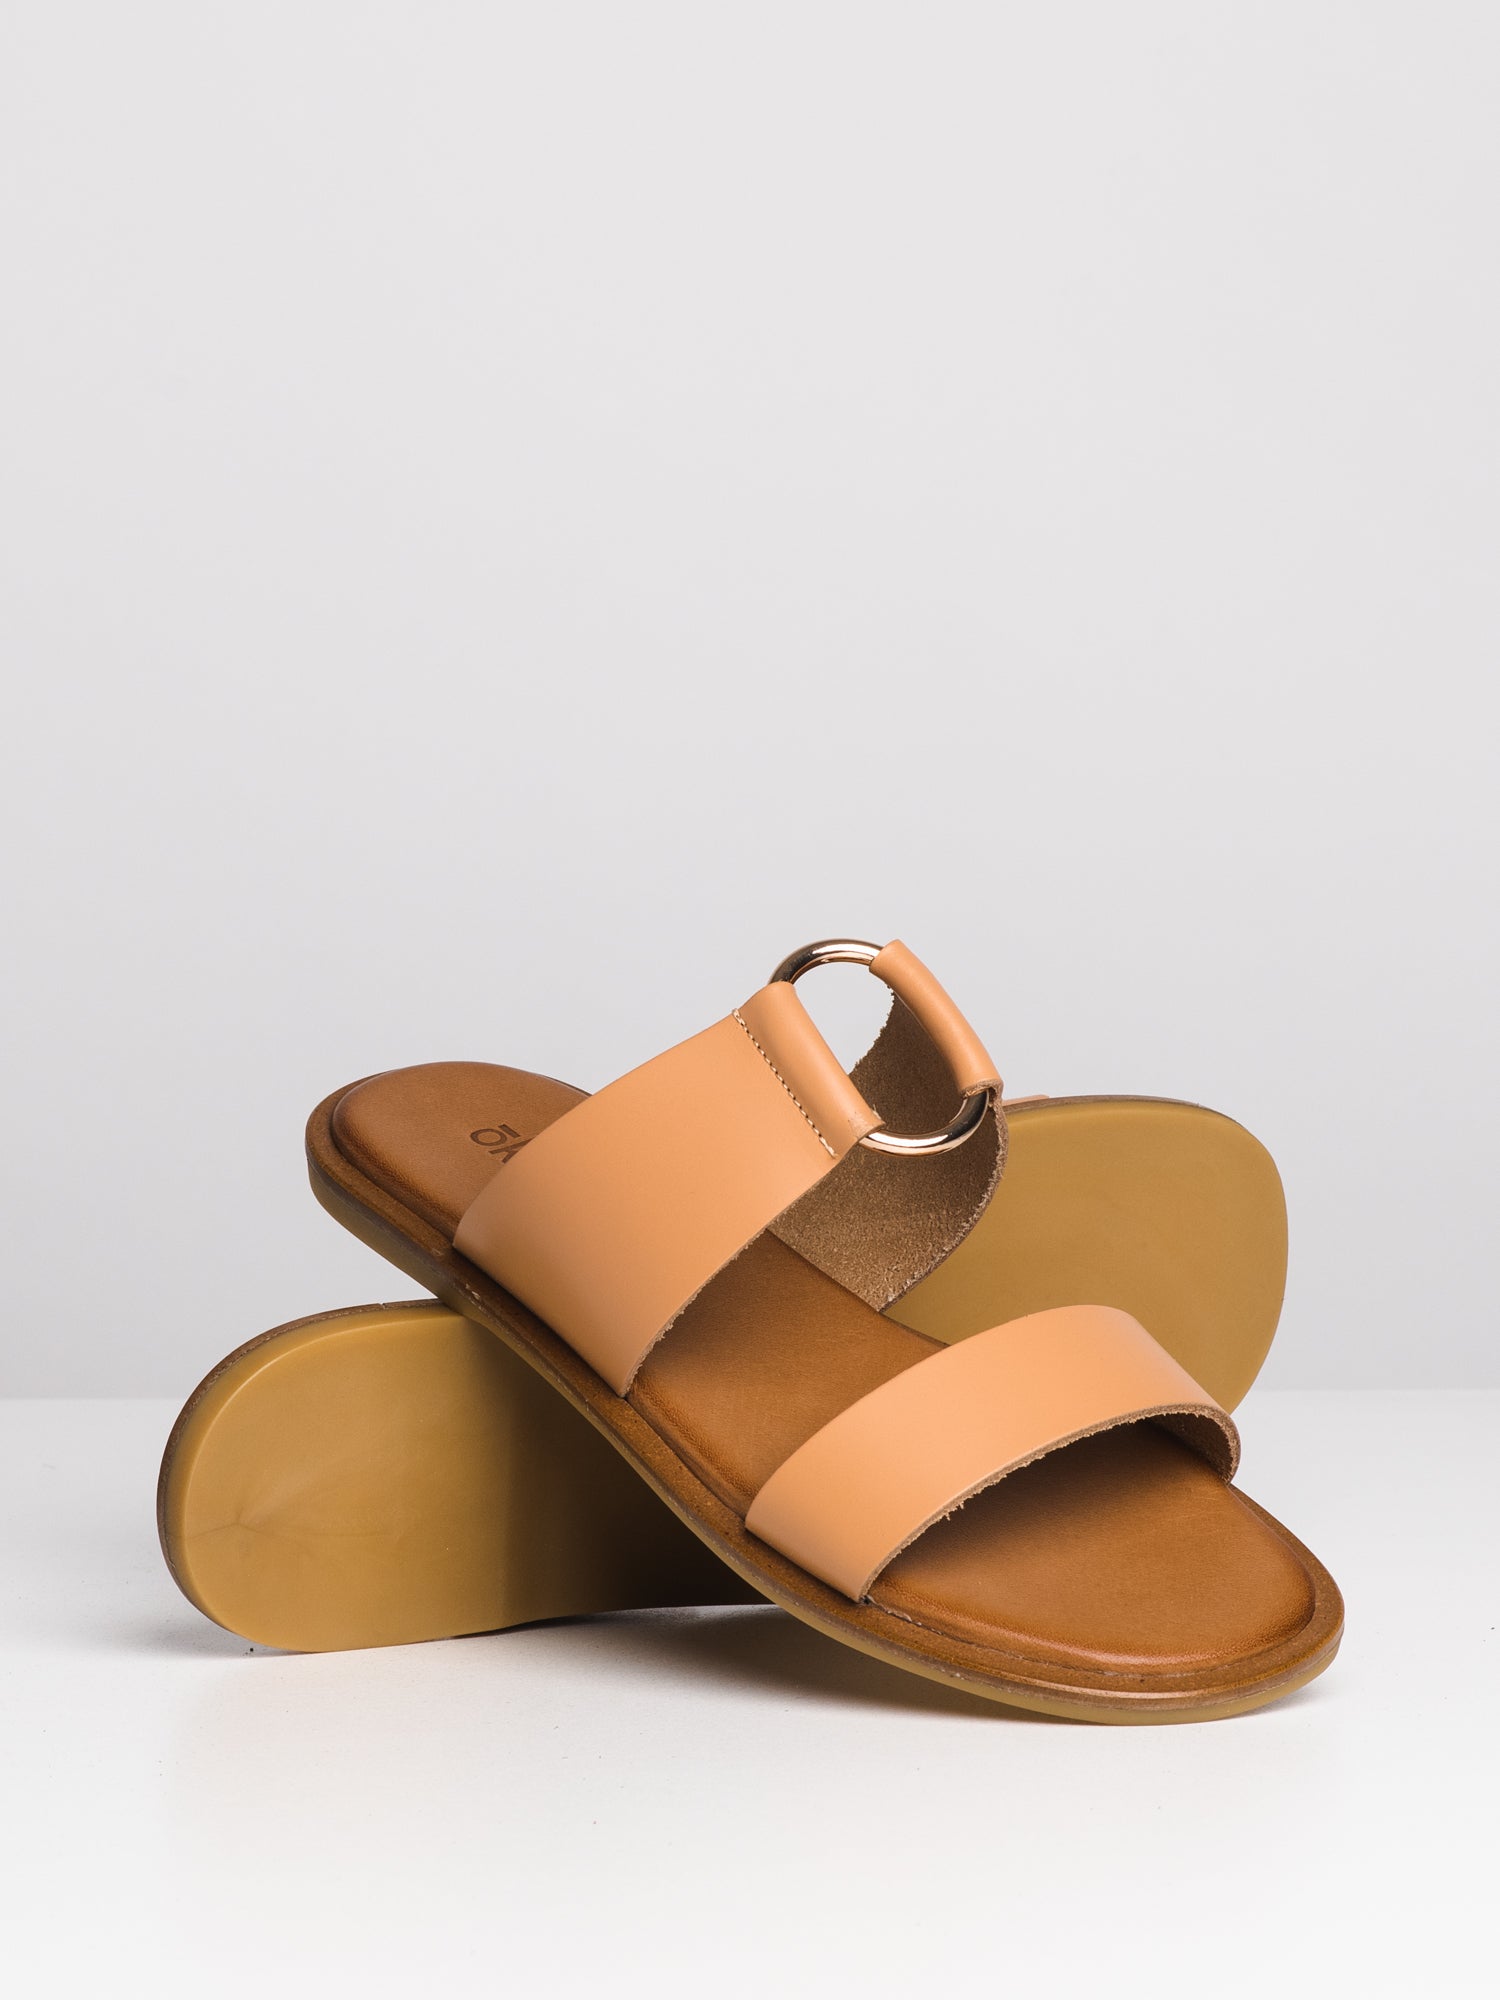 WOMENS AZRA - NUDE-D2 - CLEARANCE | Blackwell Supply Co.